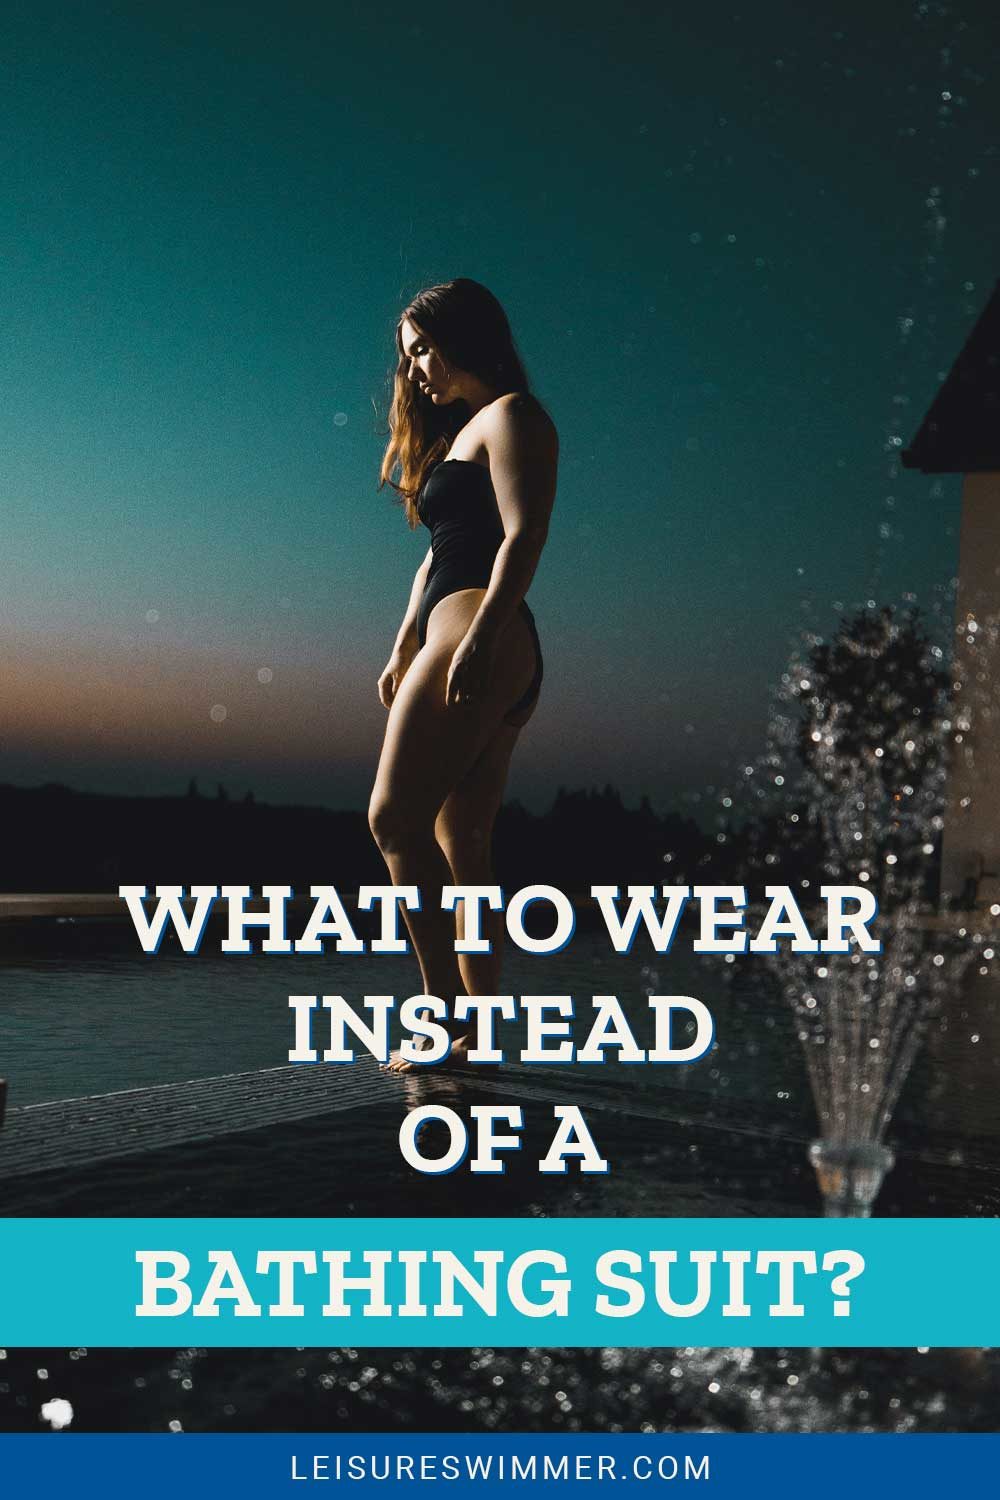 Woman getting in a pool wearing black swimsuit - What To Wear Instead Of A Bathing Suit?